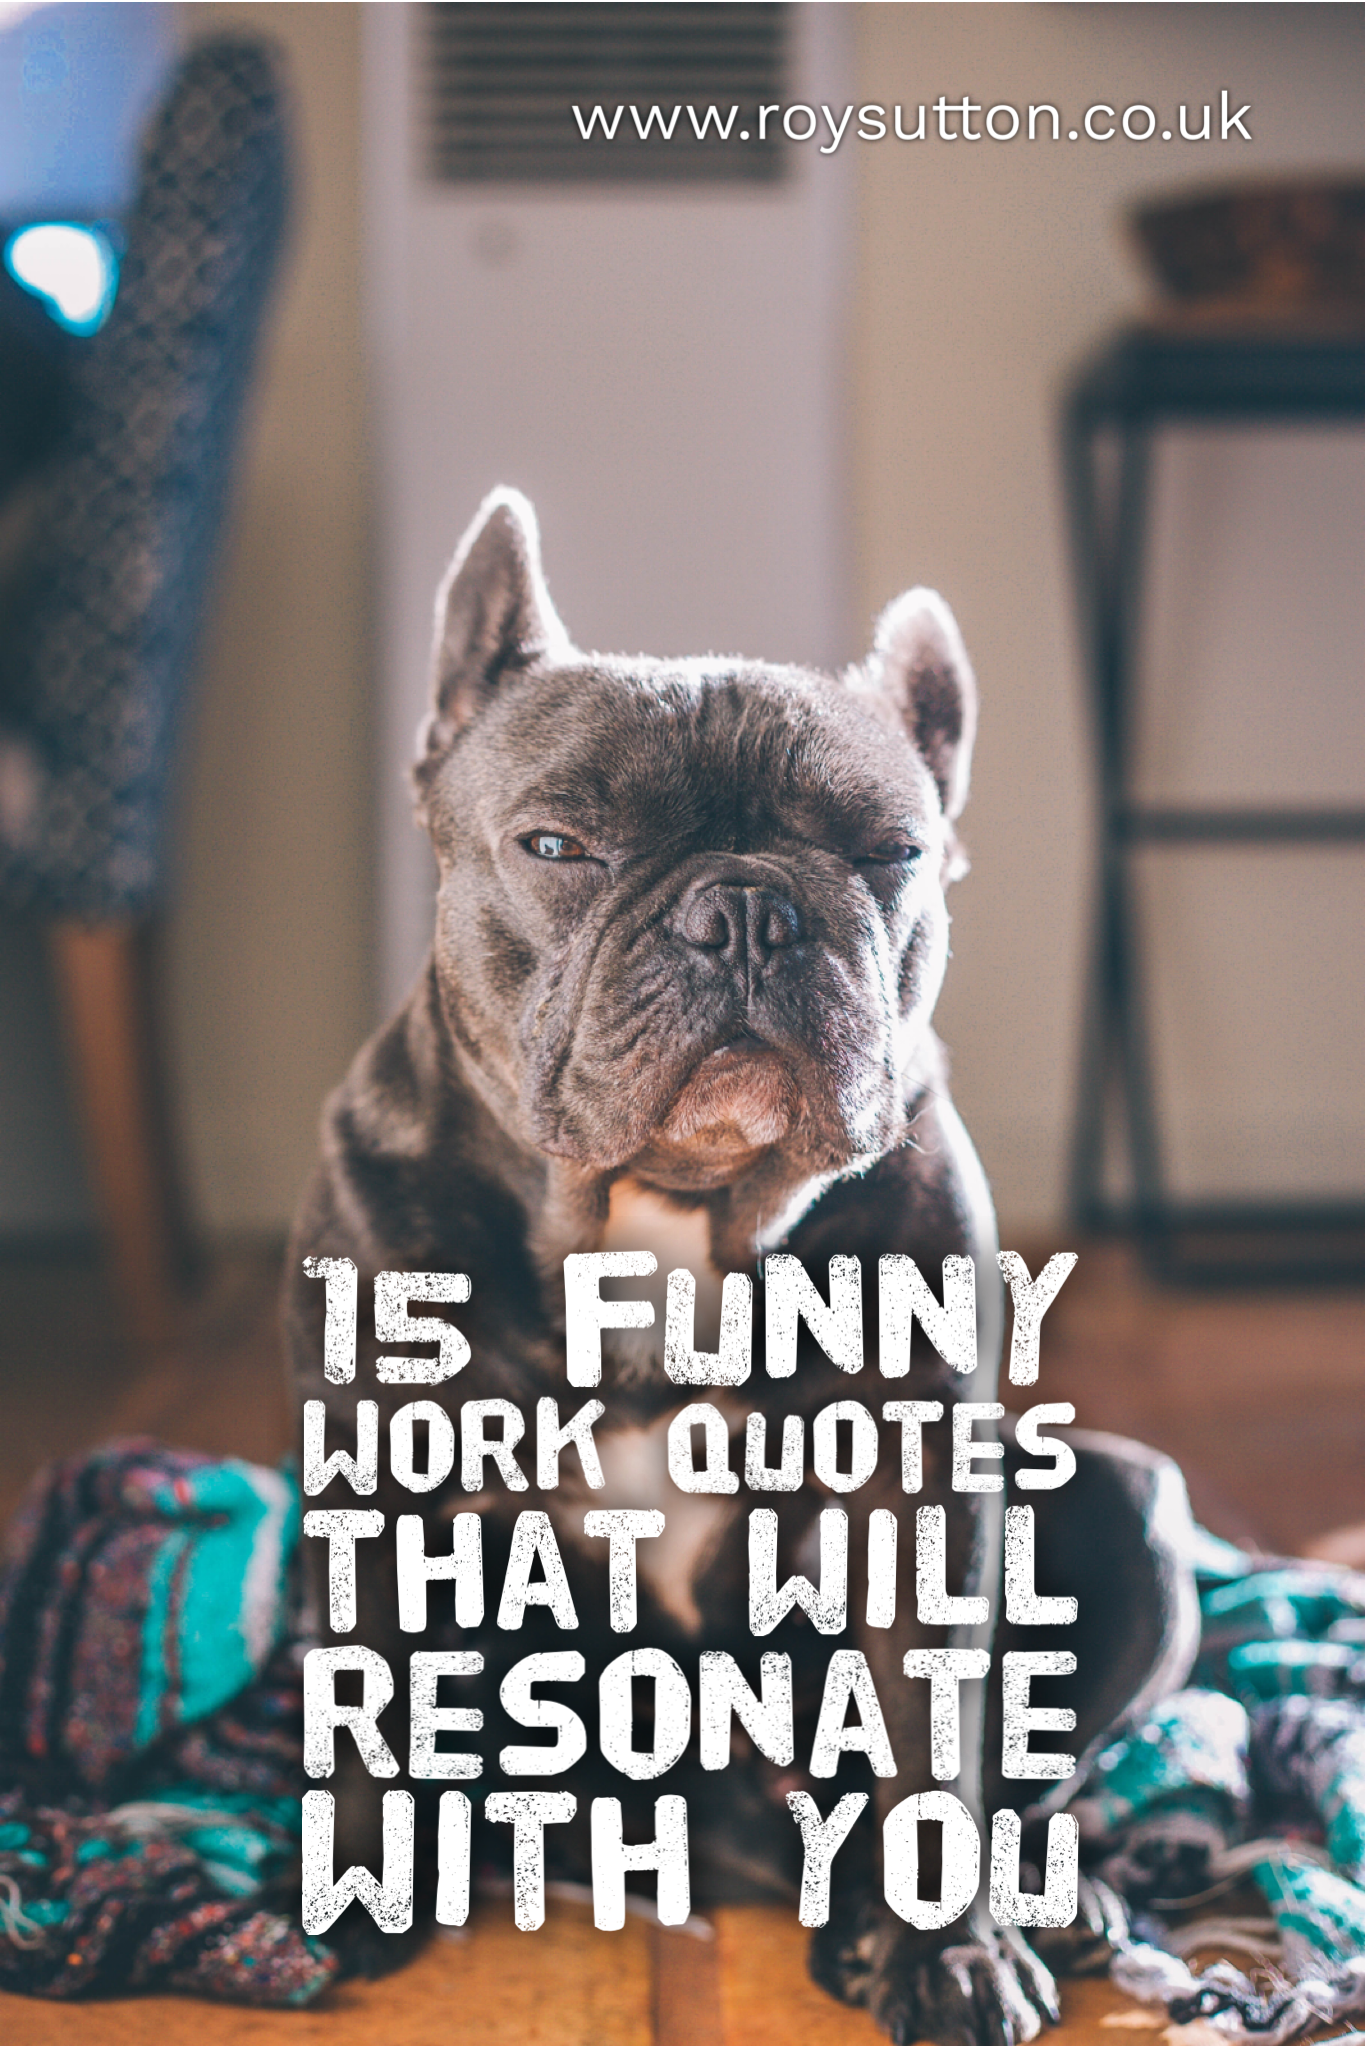 50 Funny Work Quotes And Sayings 2022 - Photos